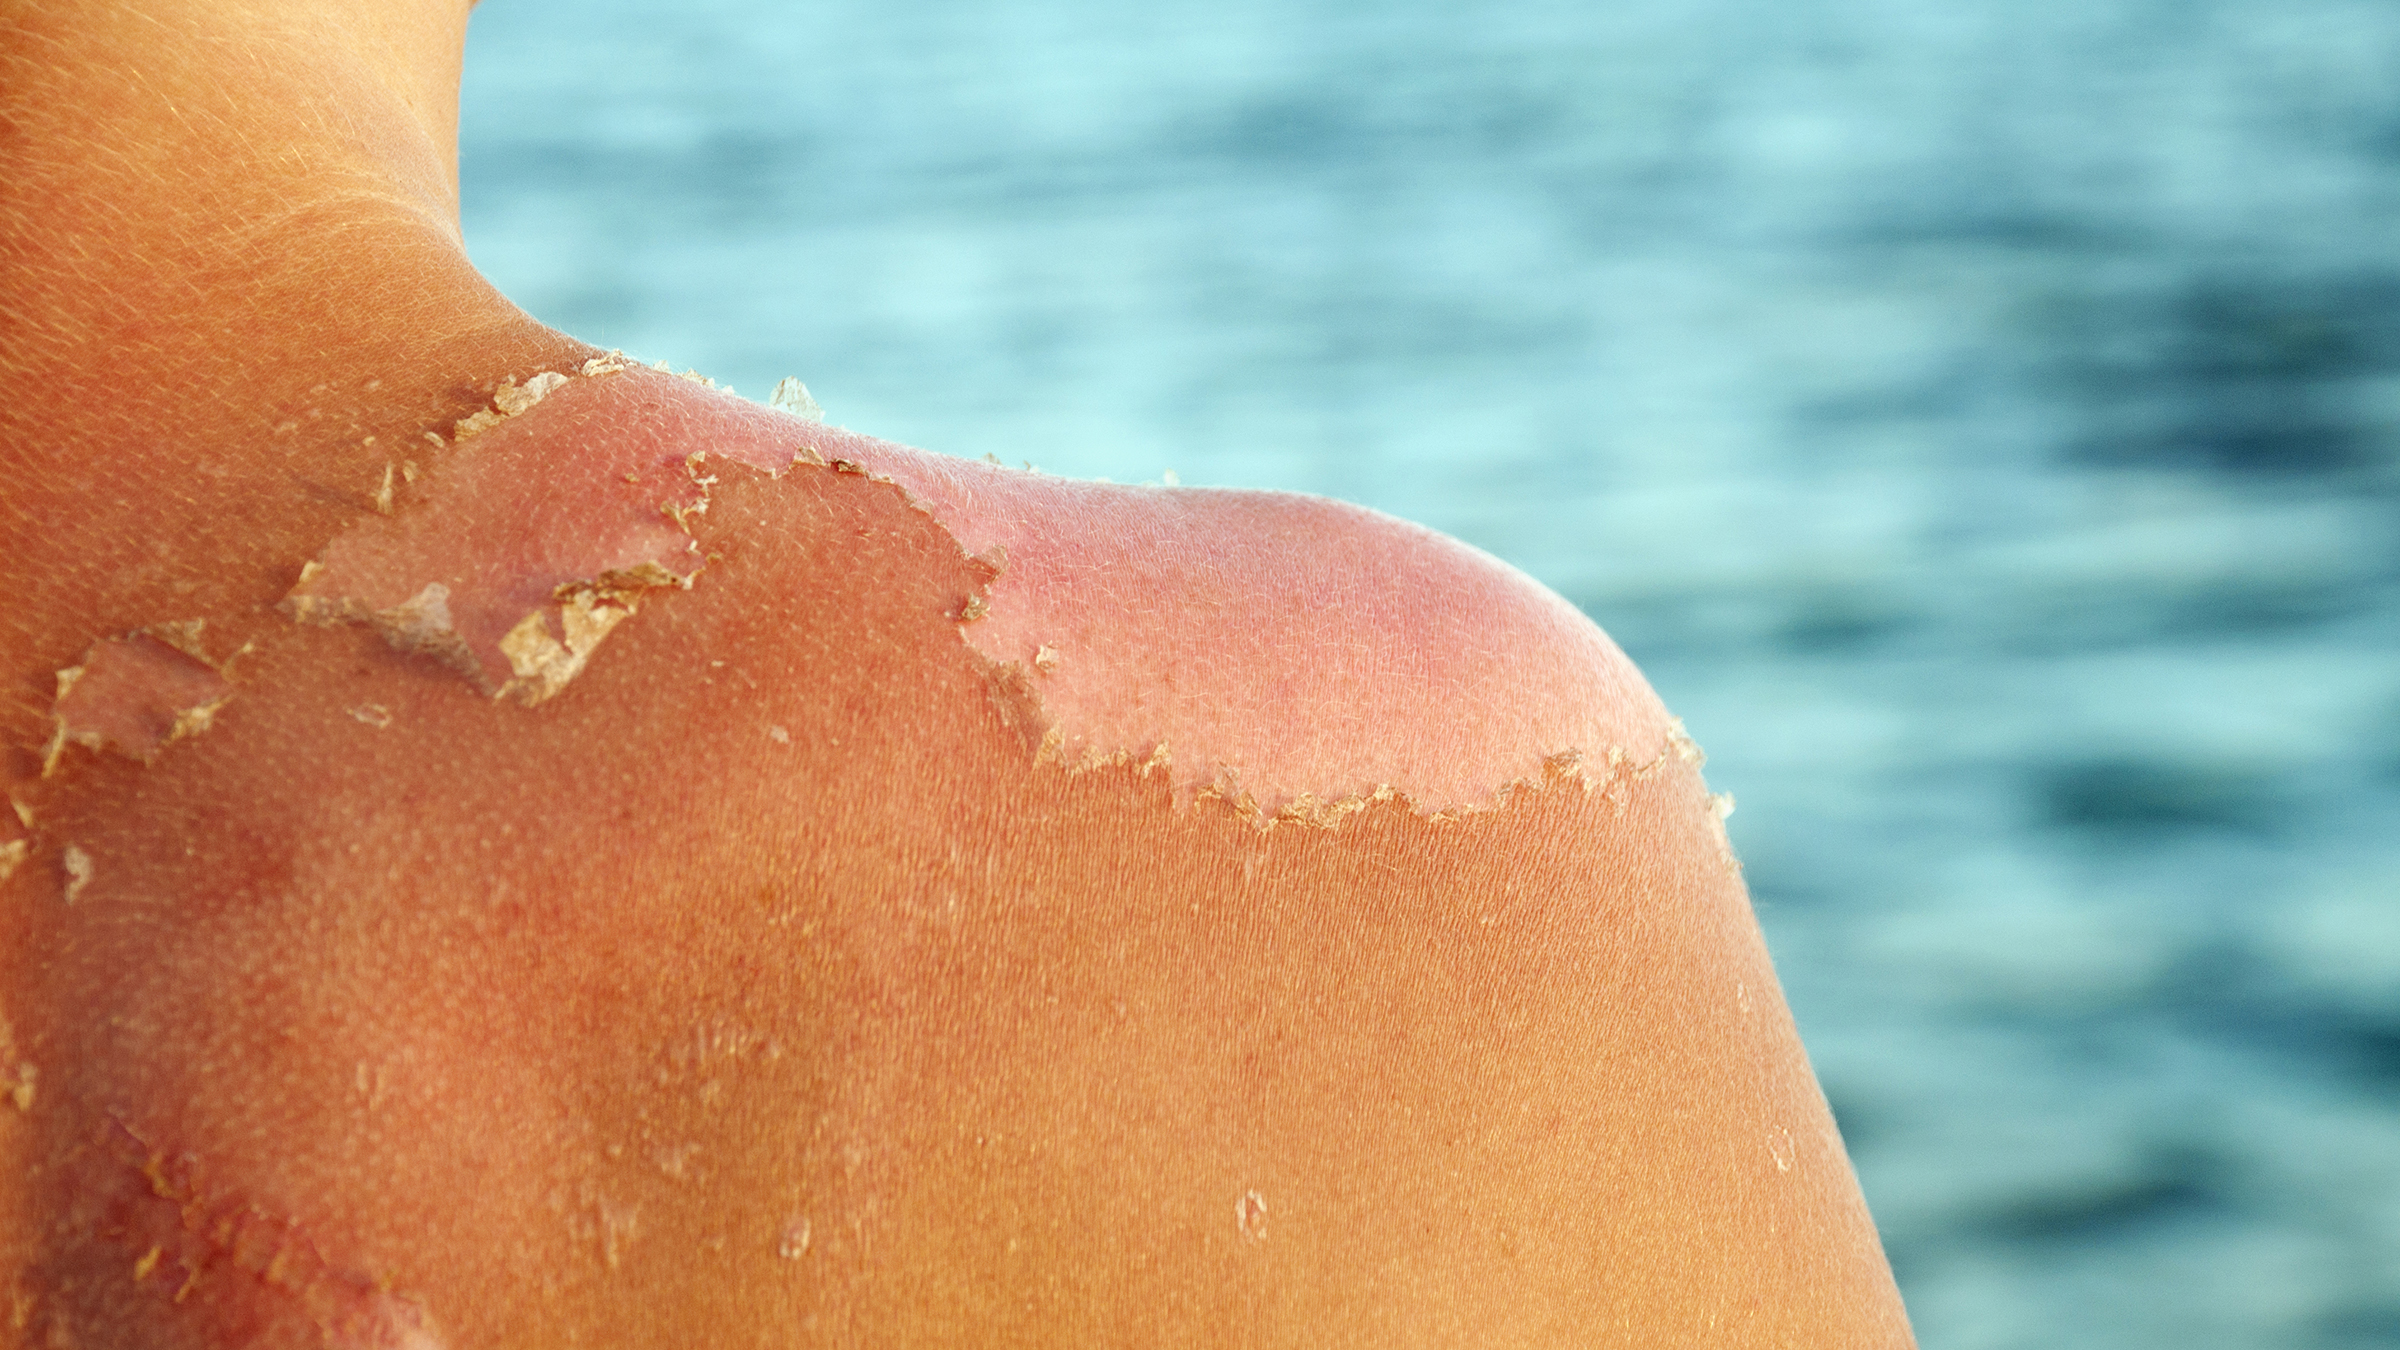 A tan will not protect your skin from sunburn or other skin damage